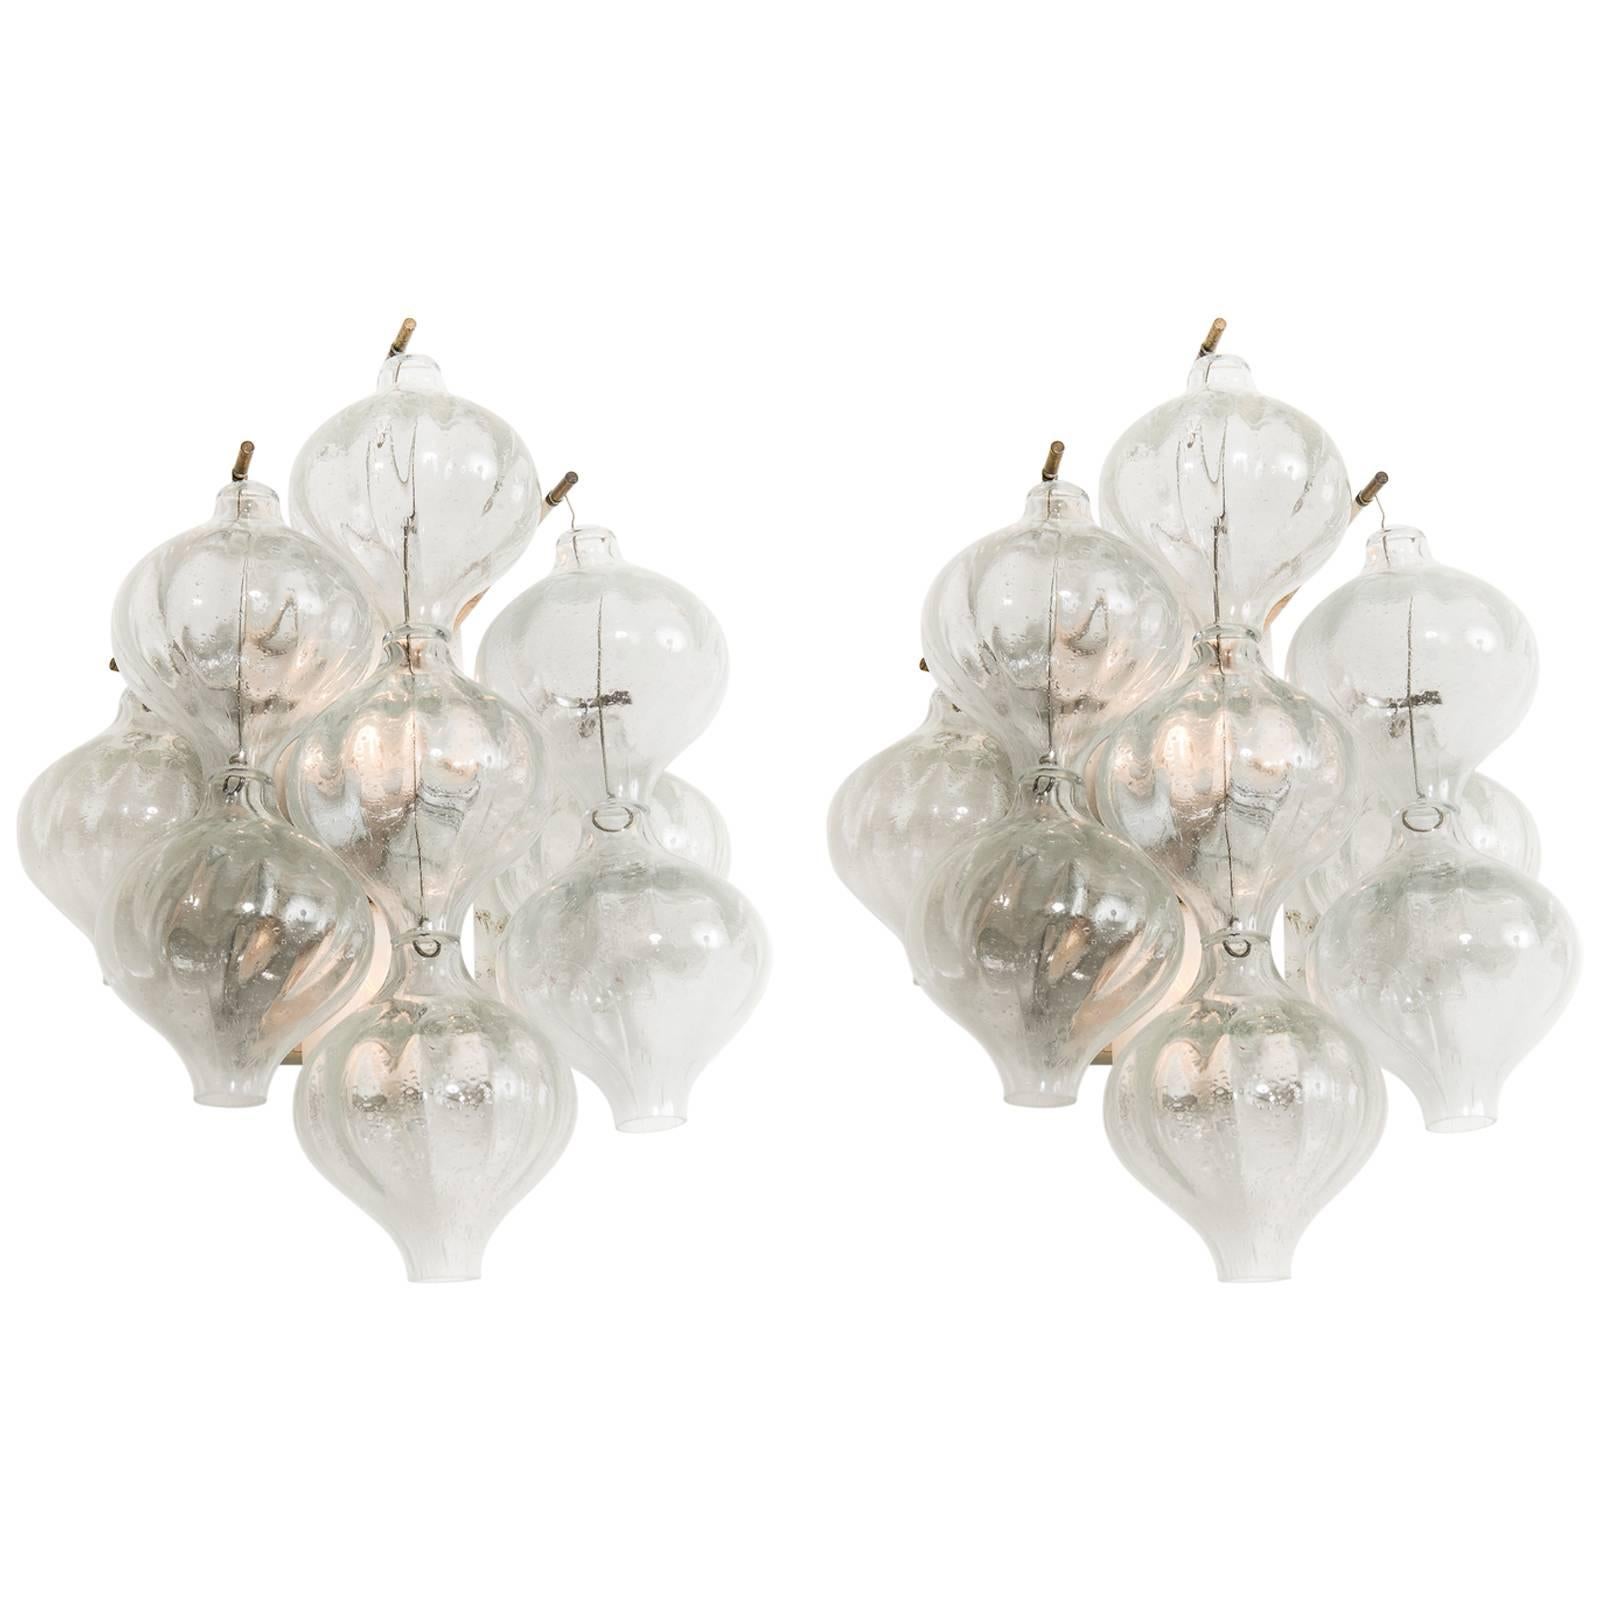 Pair of Wall Lights or Sconces, "Tulipan, " by J.T. Kalmar For Sale